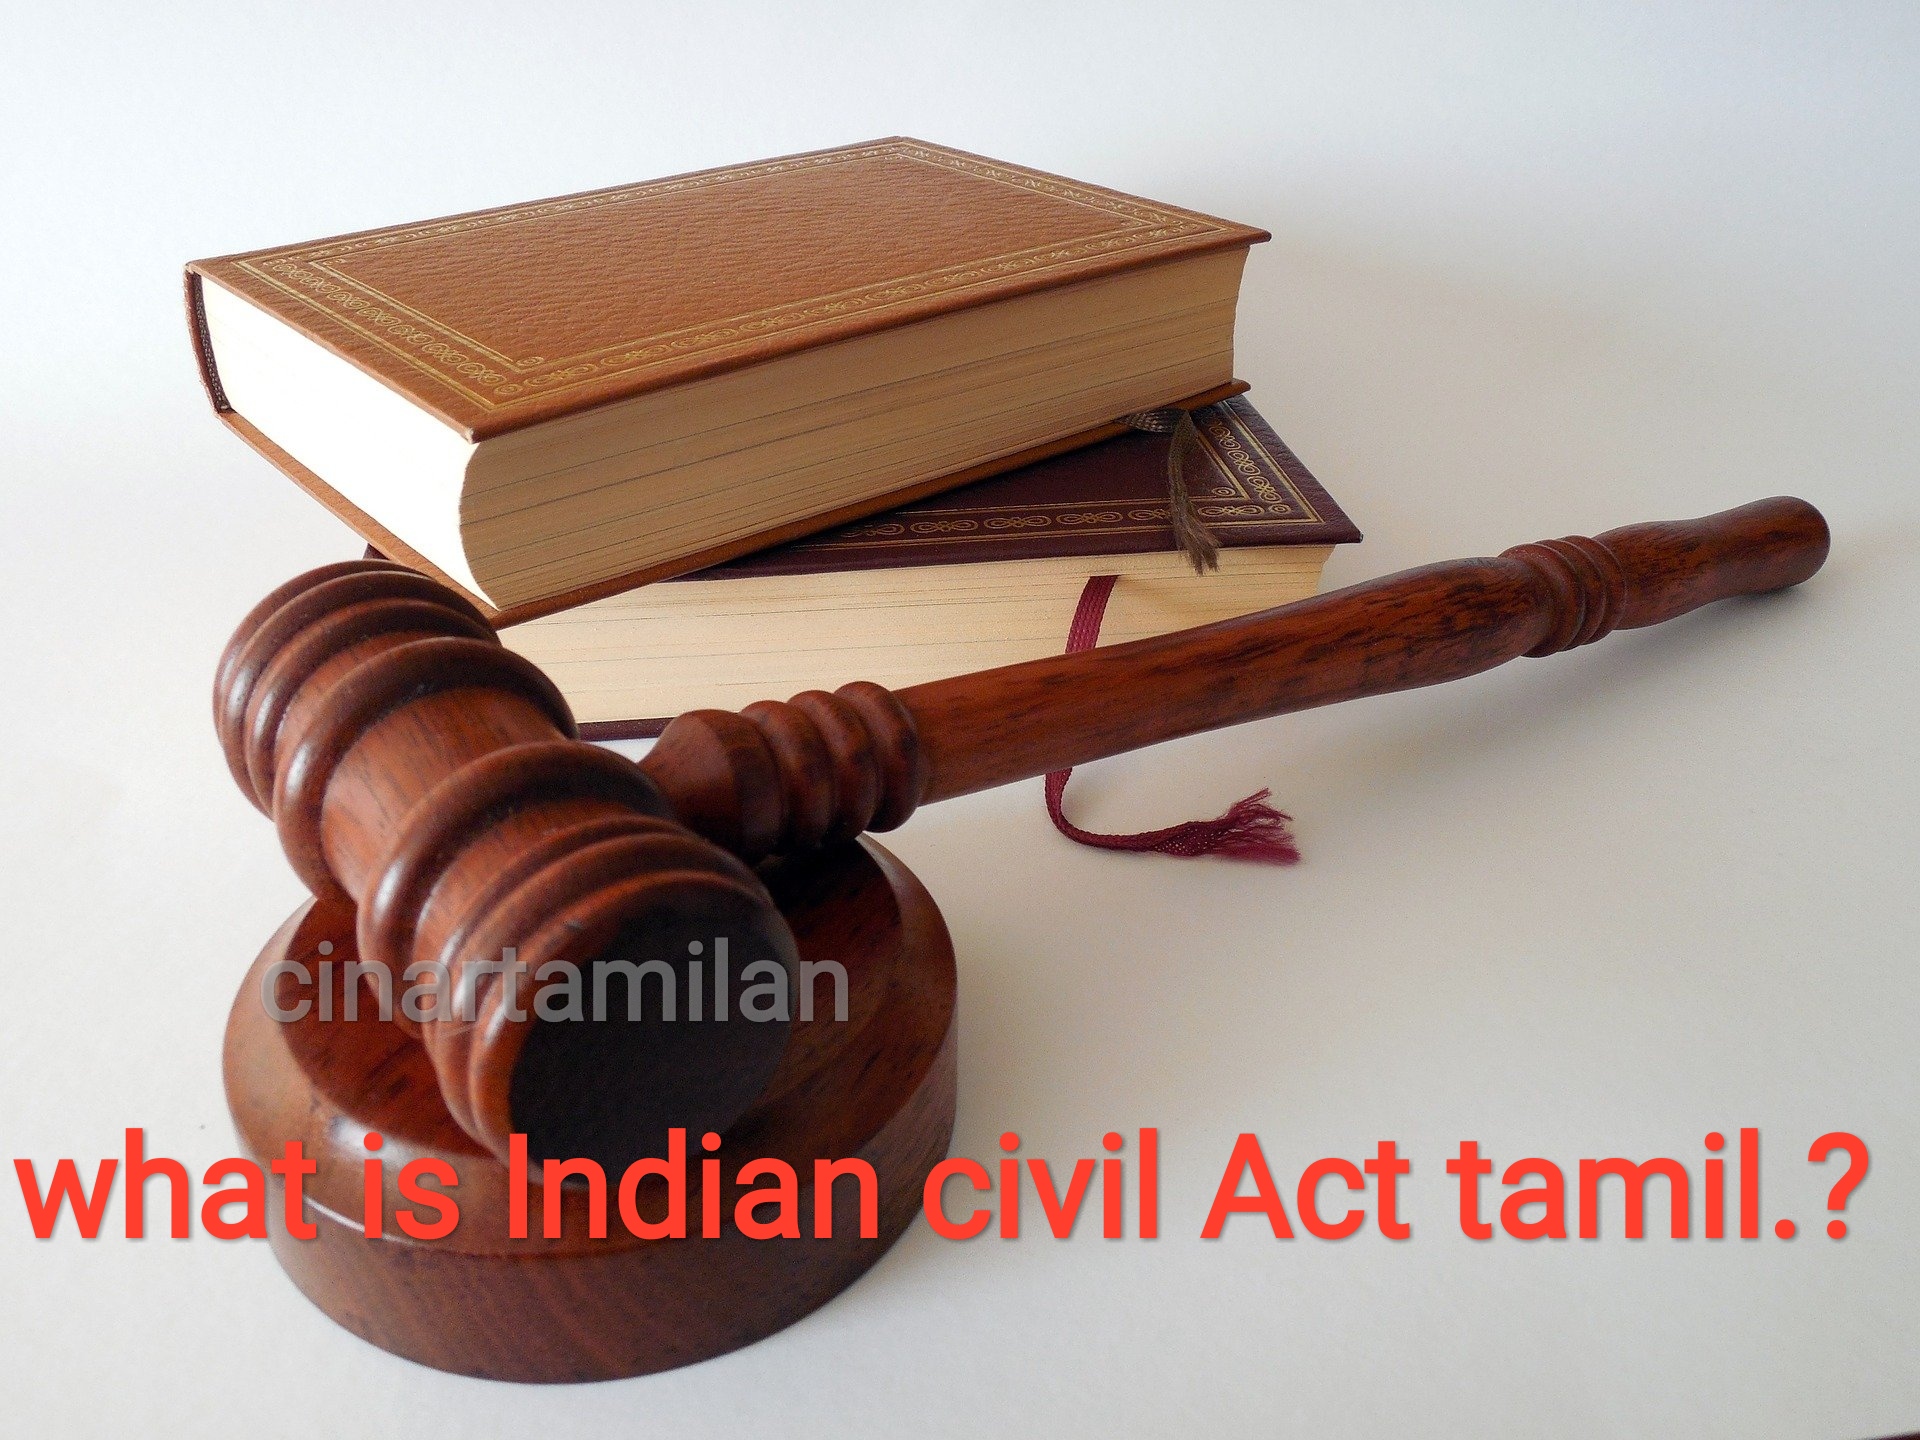 what is the Indian civil Act tamil.?